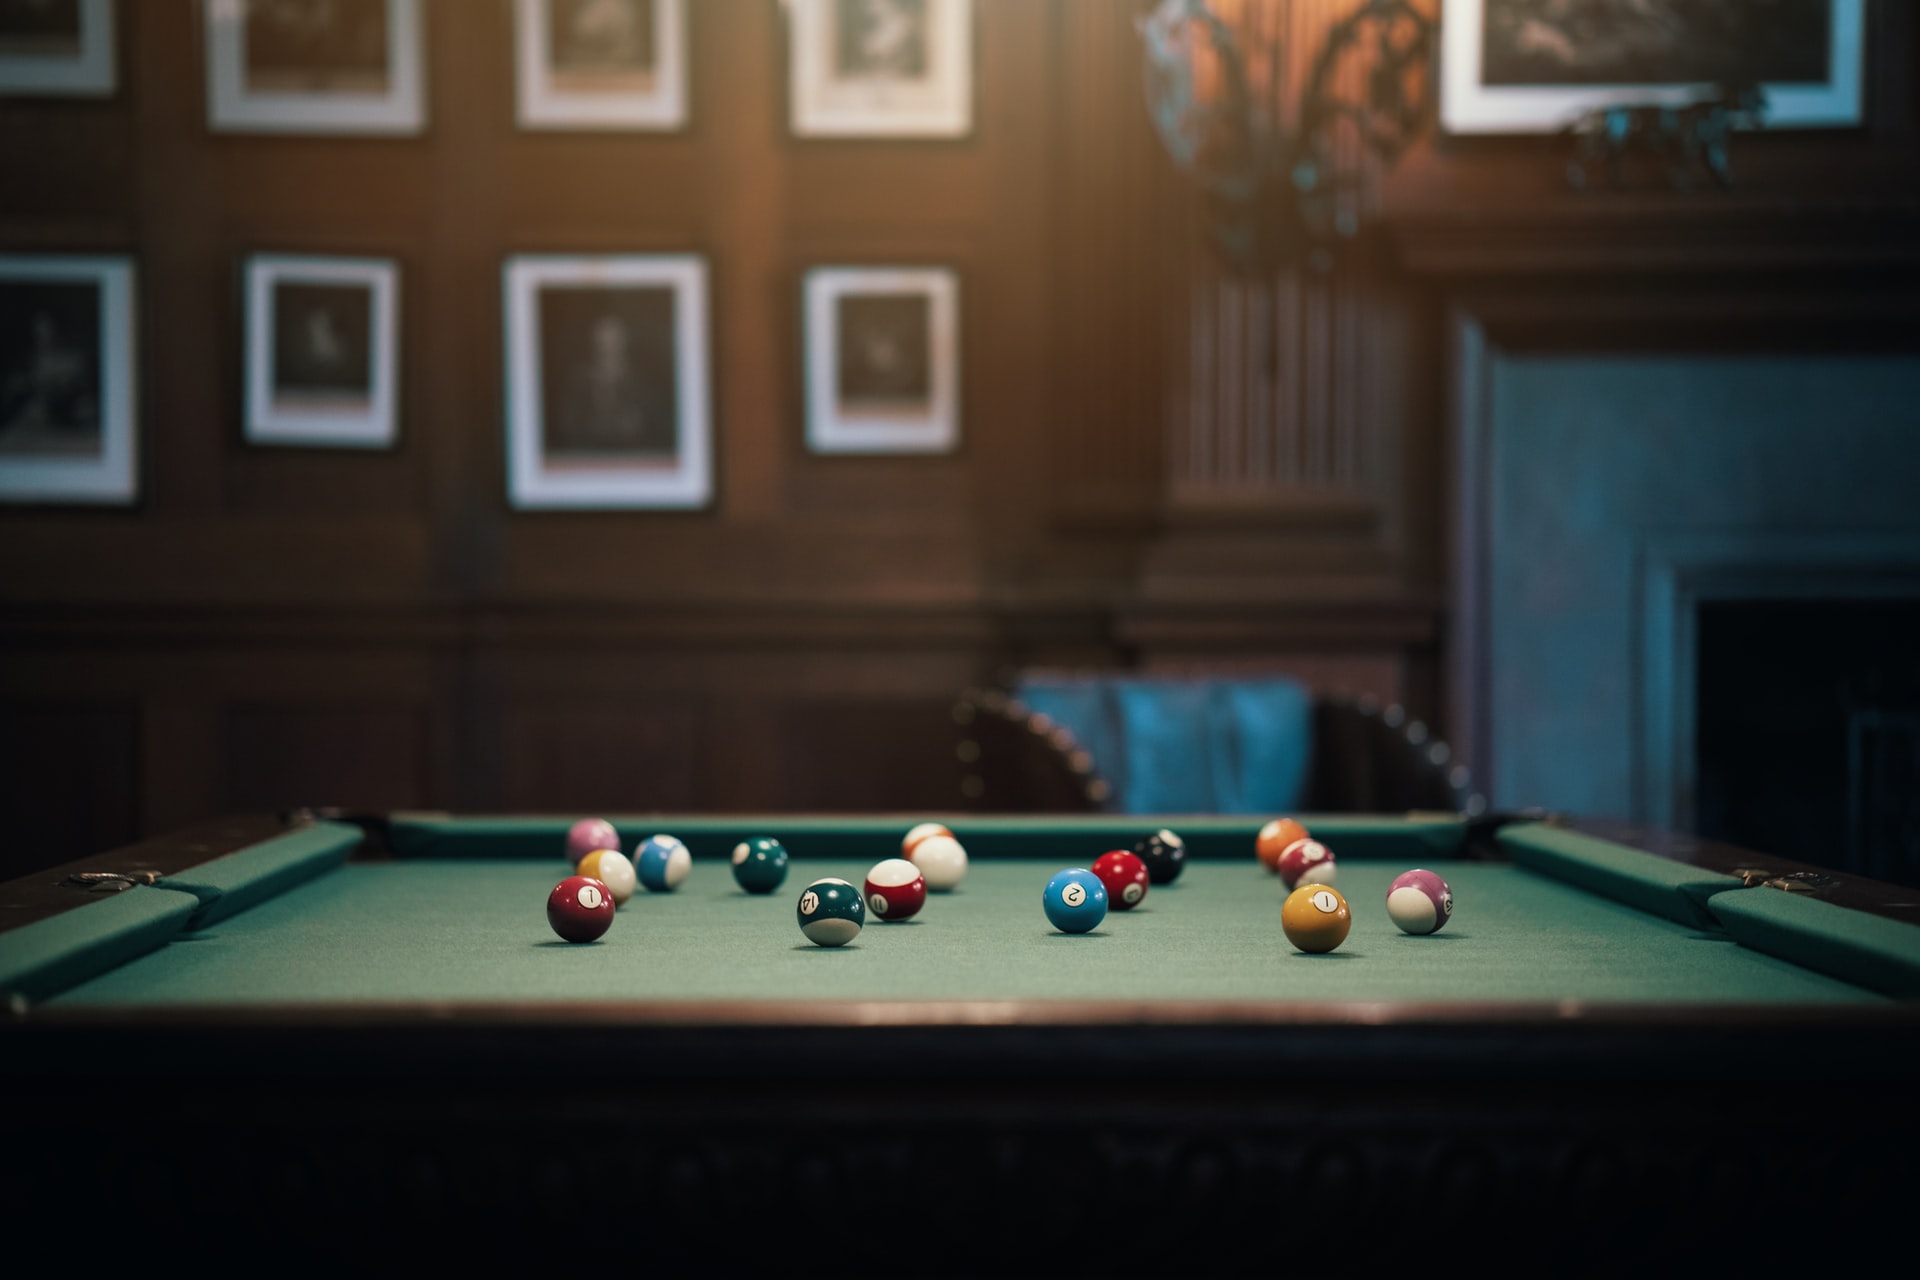 How To Tell If Pool Table Is Slate?